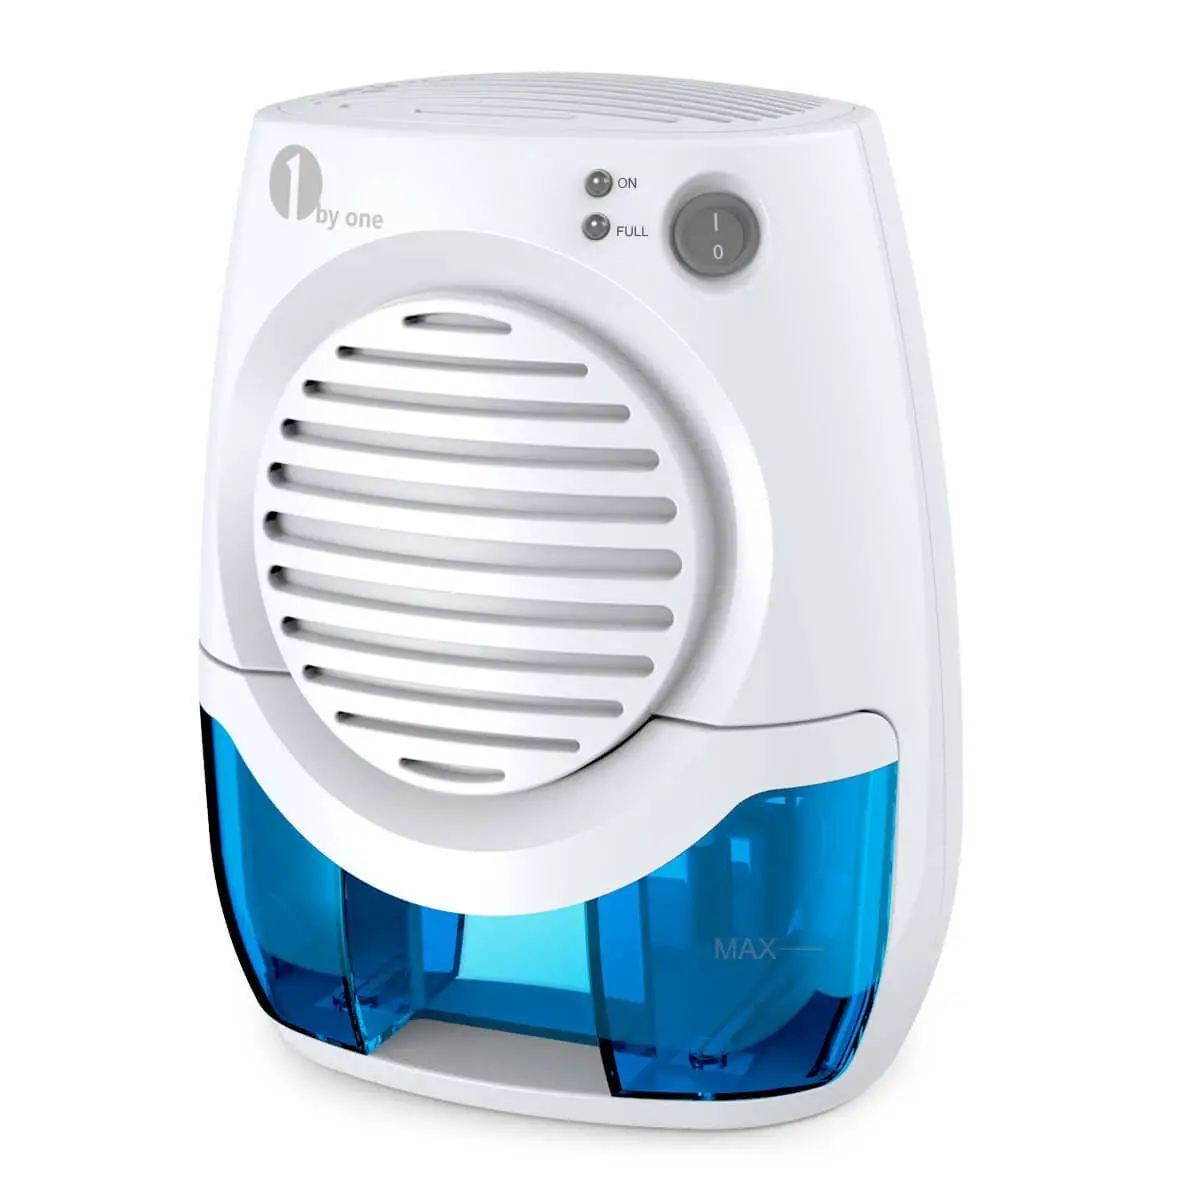 10 Best Dehumidifier For Bathroom Reviews Smart Home Pick